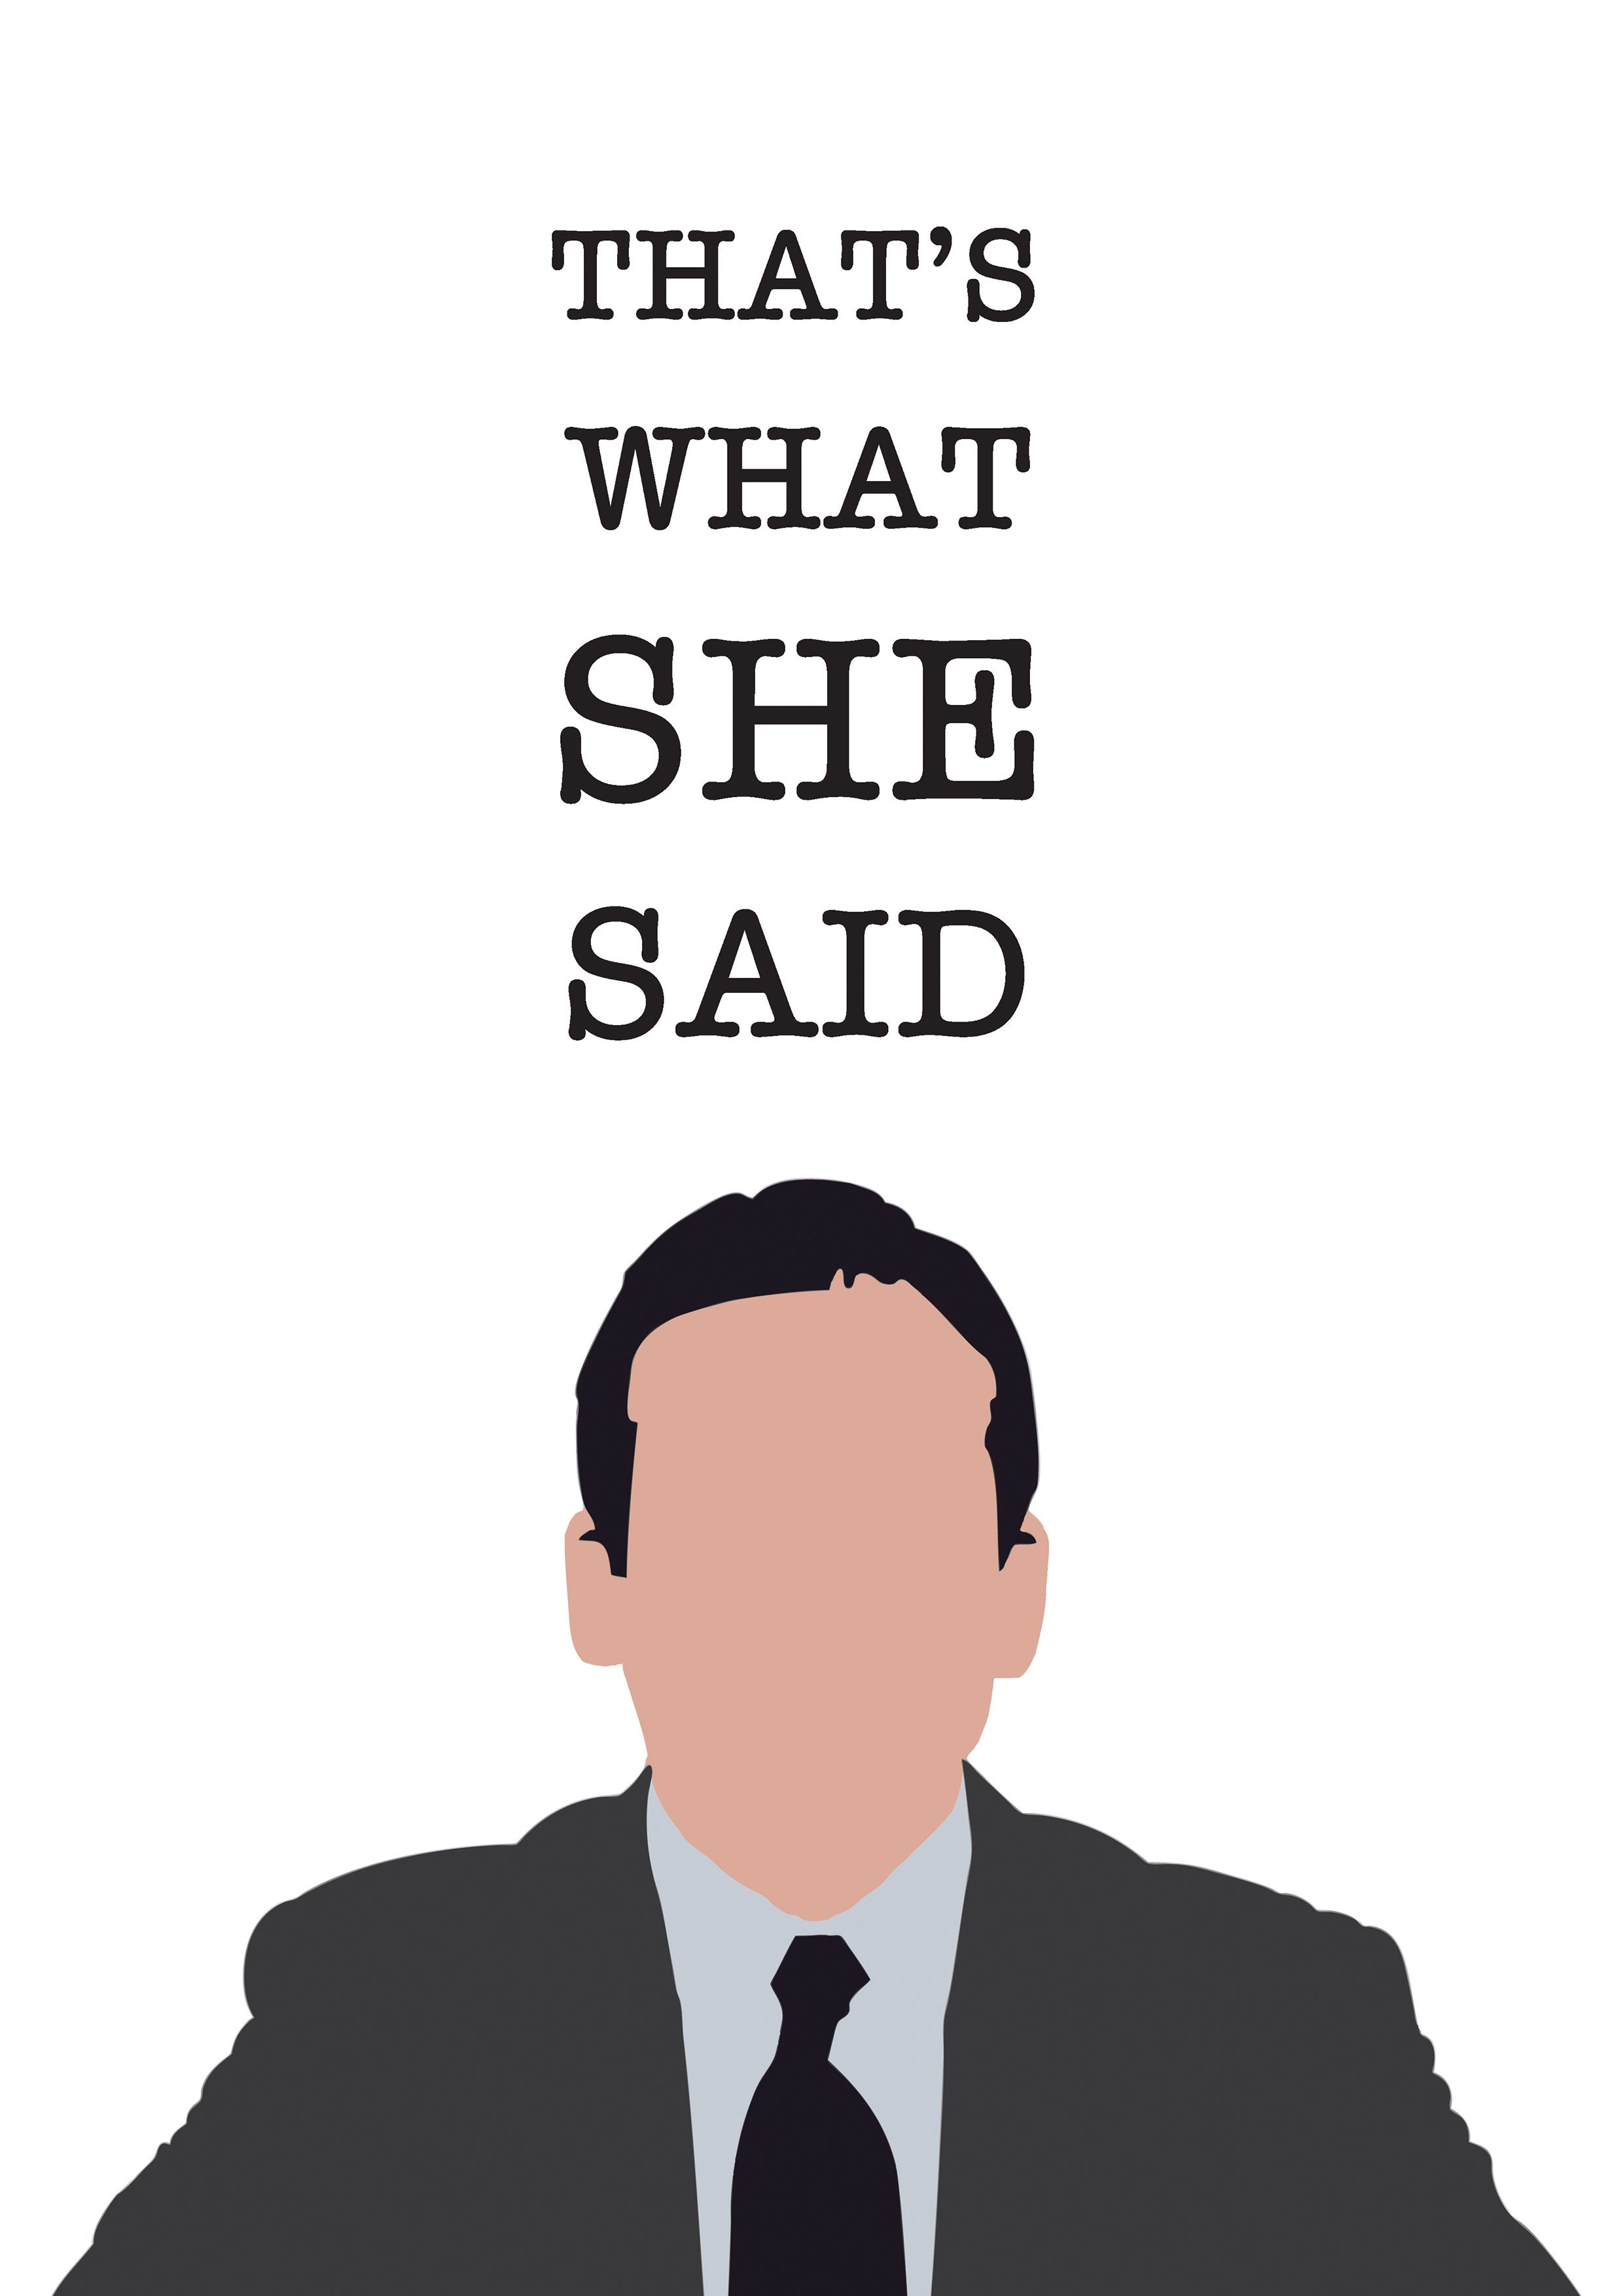 That'S What She Said Wallpapers